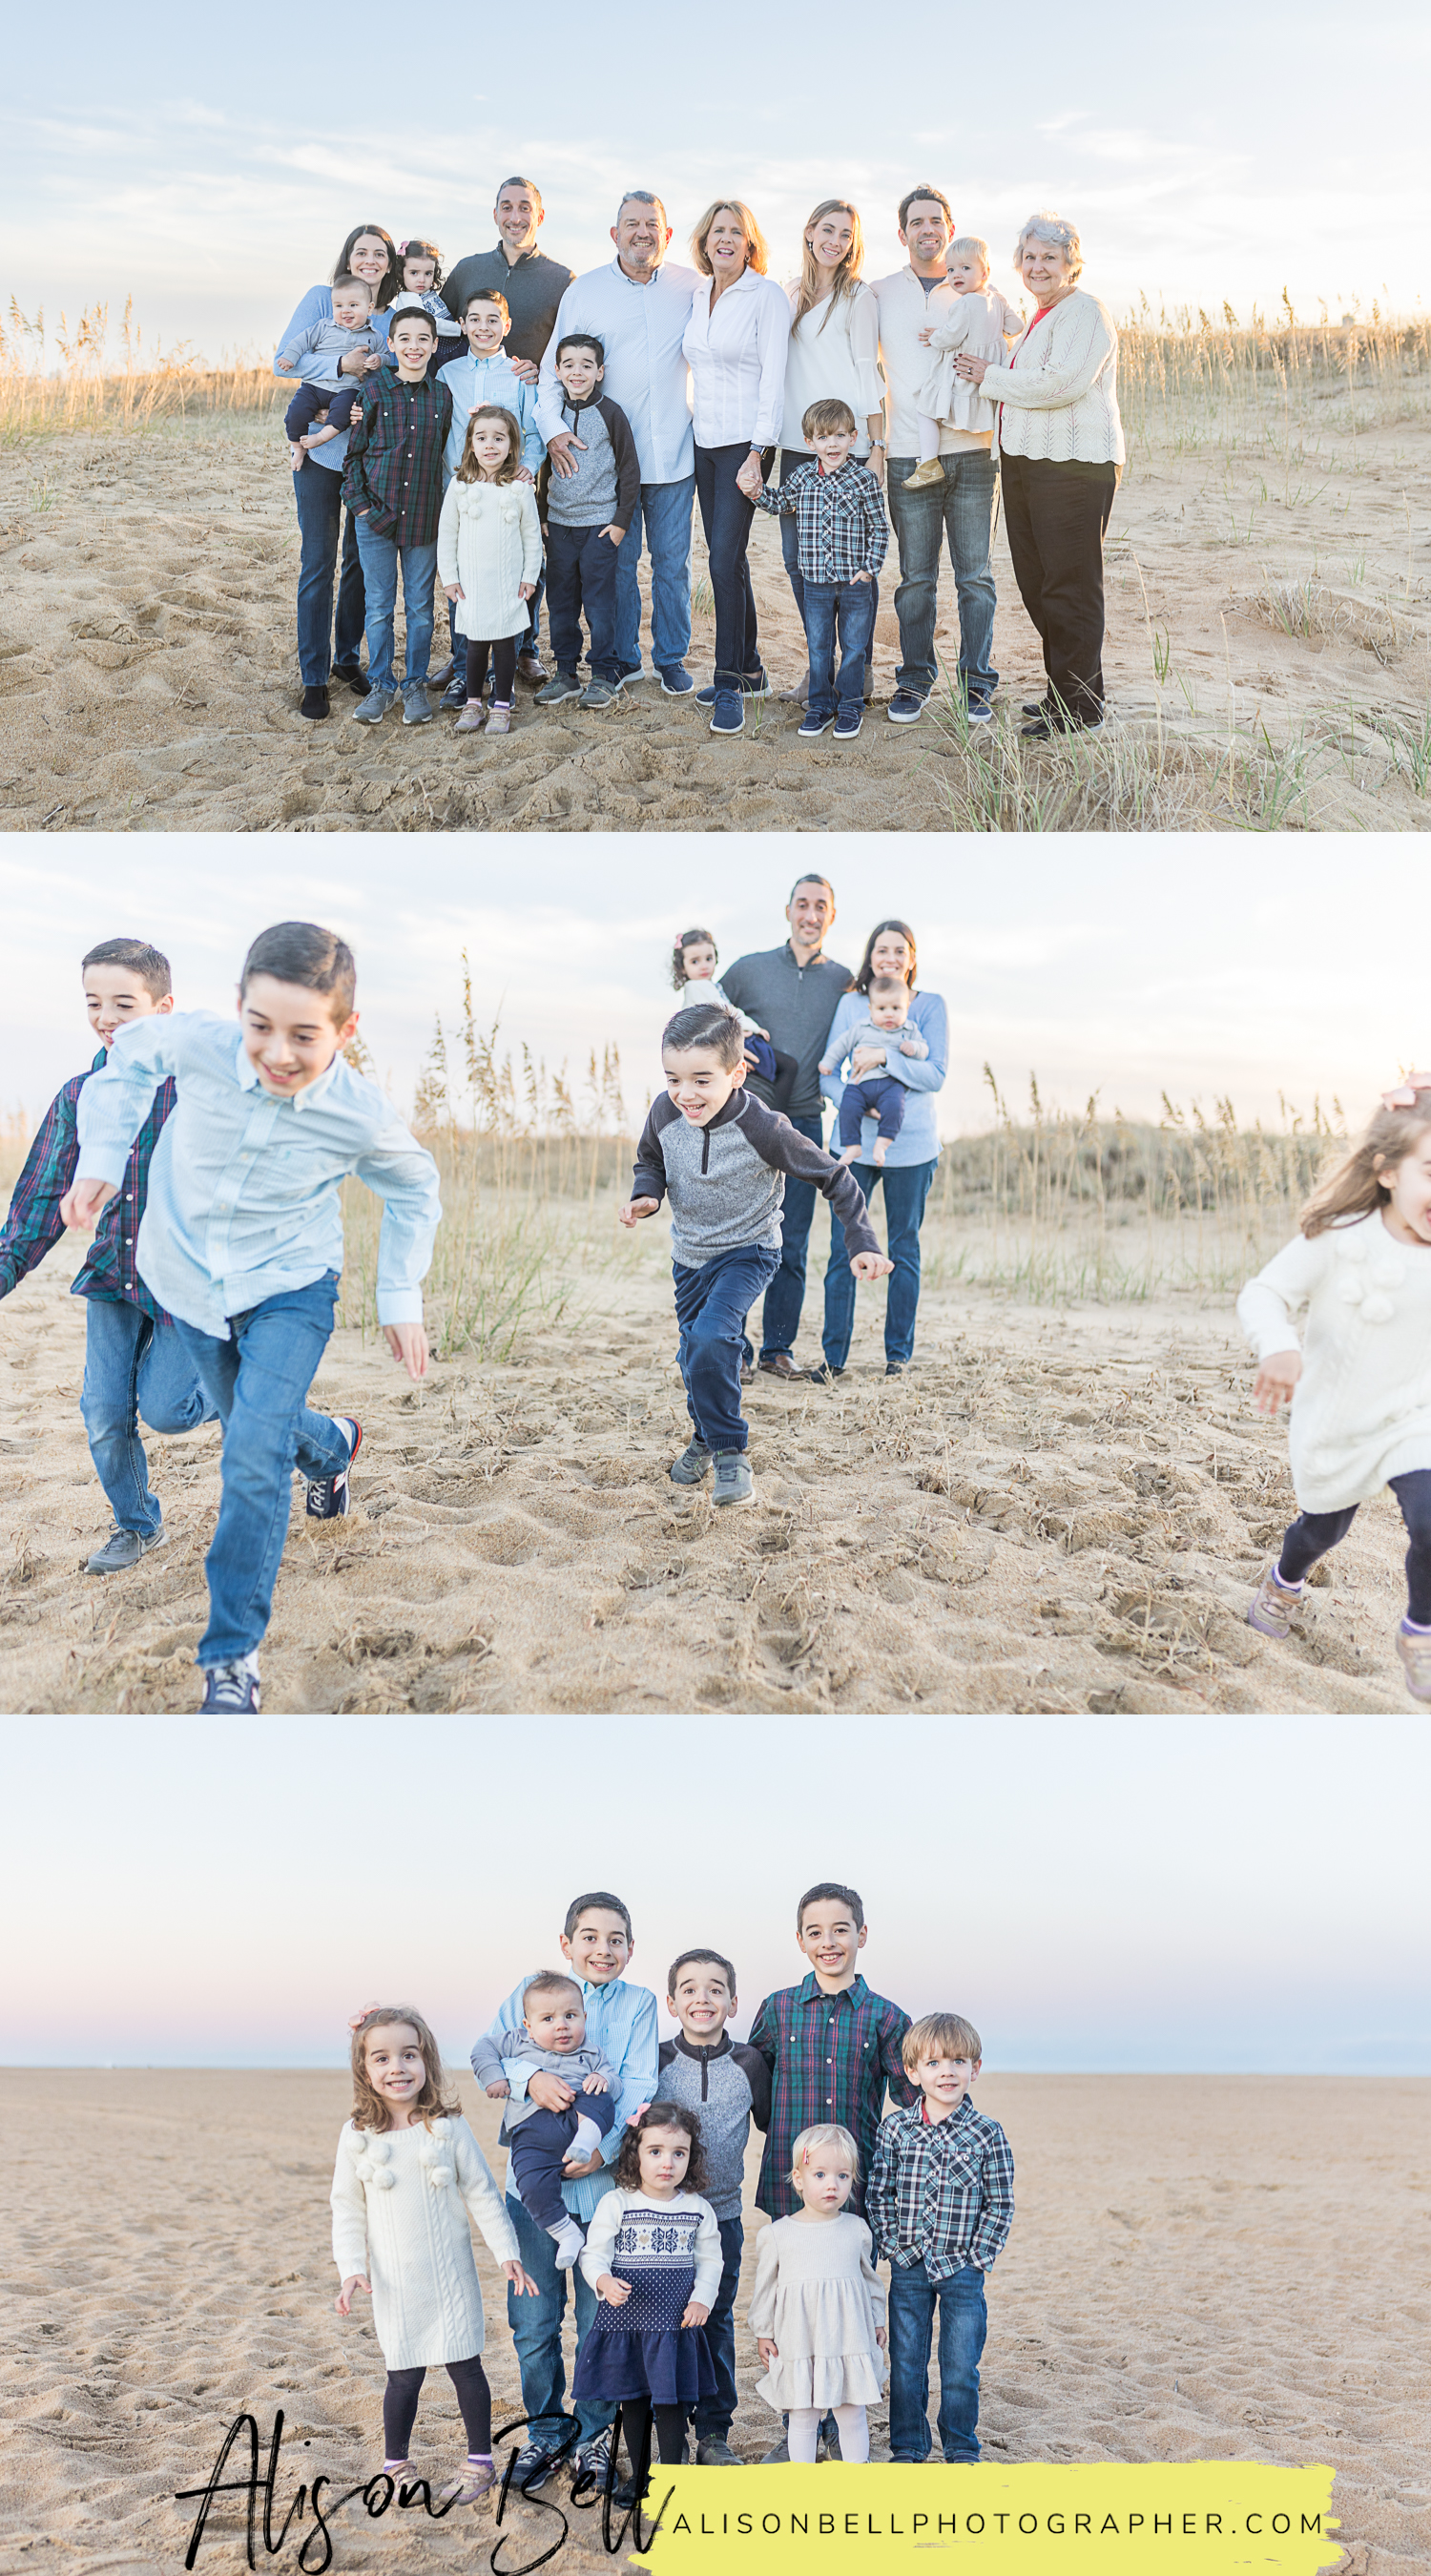 Where to get family photos taken by Alison Bell, Photographer